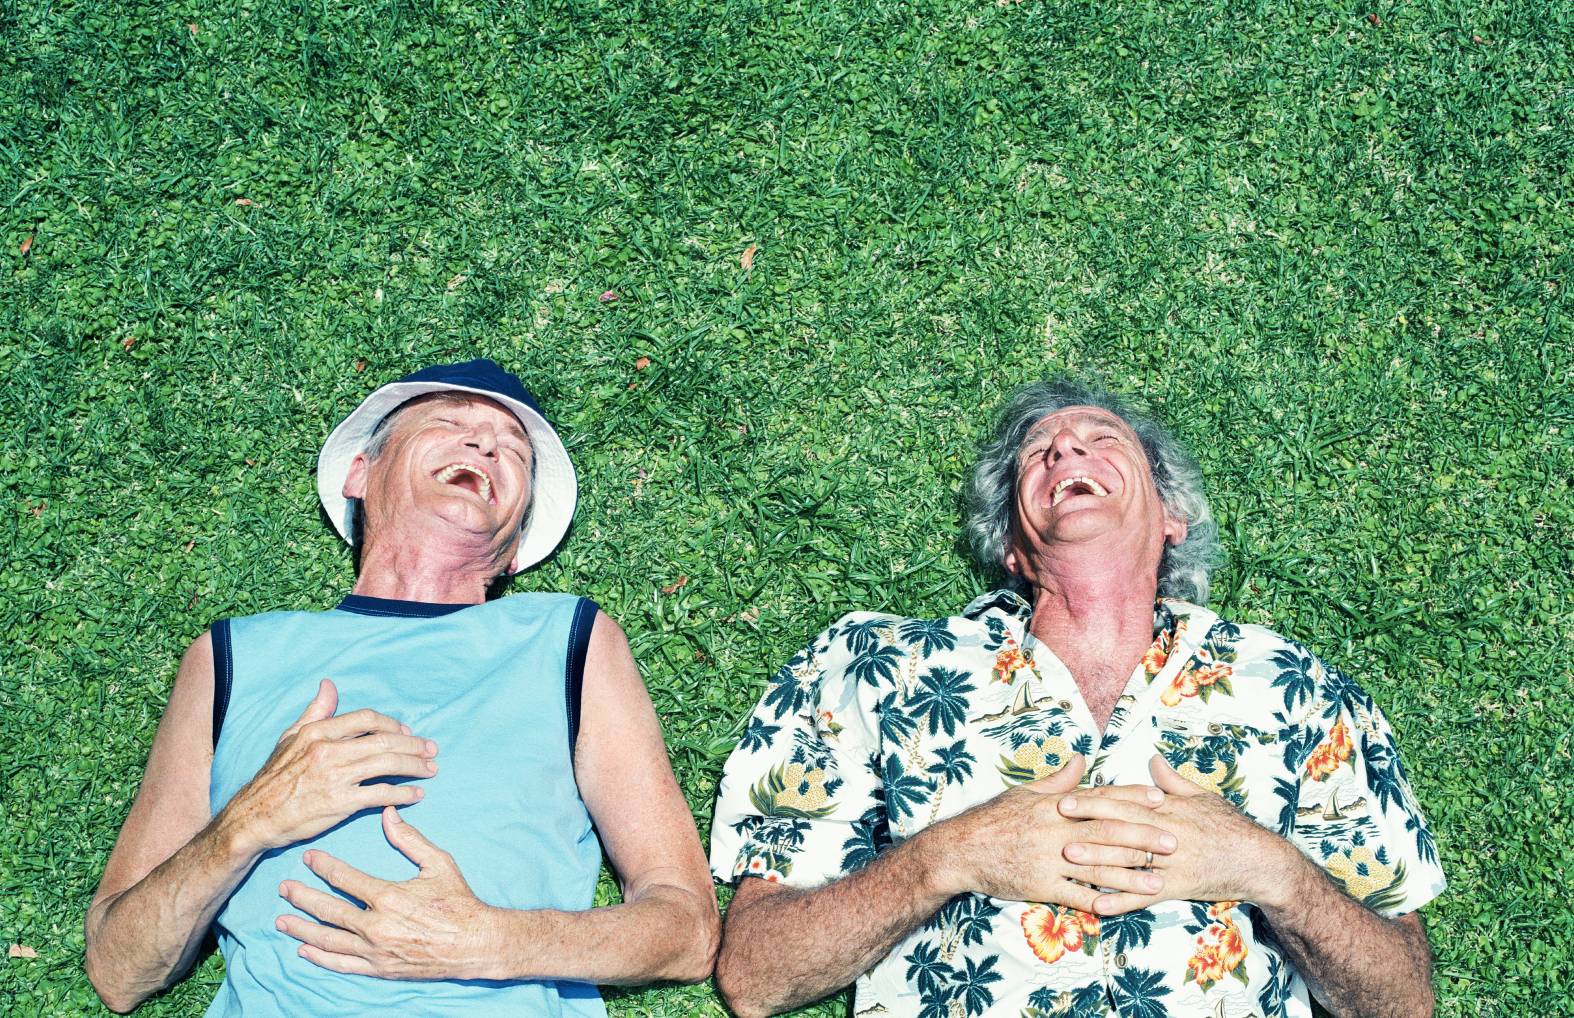 two older men laughing and laying down on grass outside